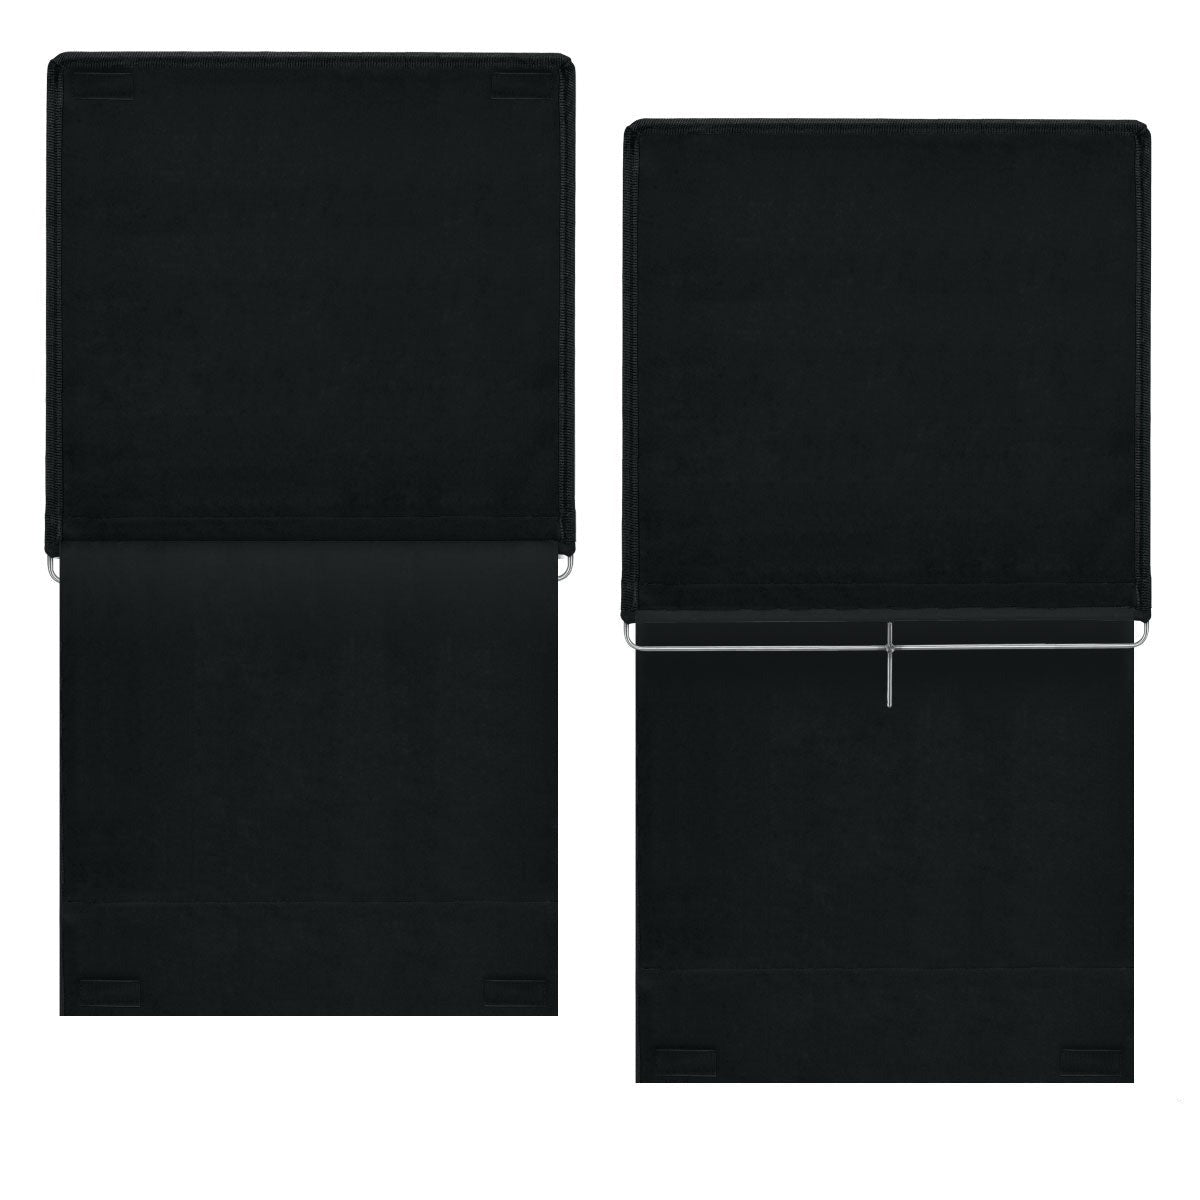 40" x 40" Commando Cloth Solid Floppy - Opens to 40" x 80"